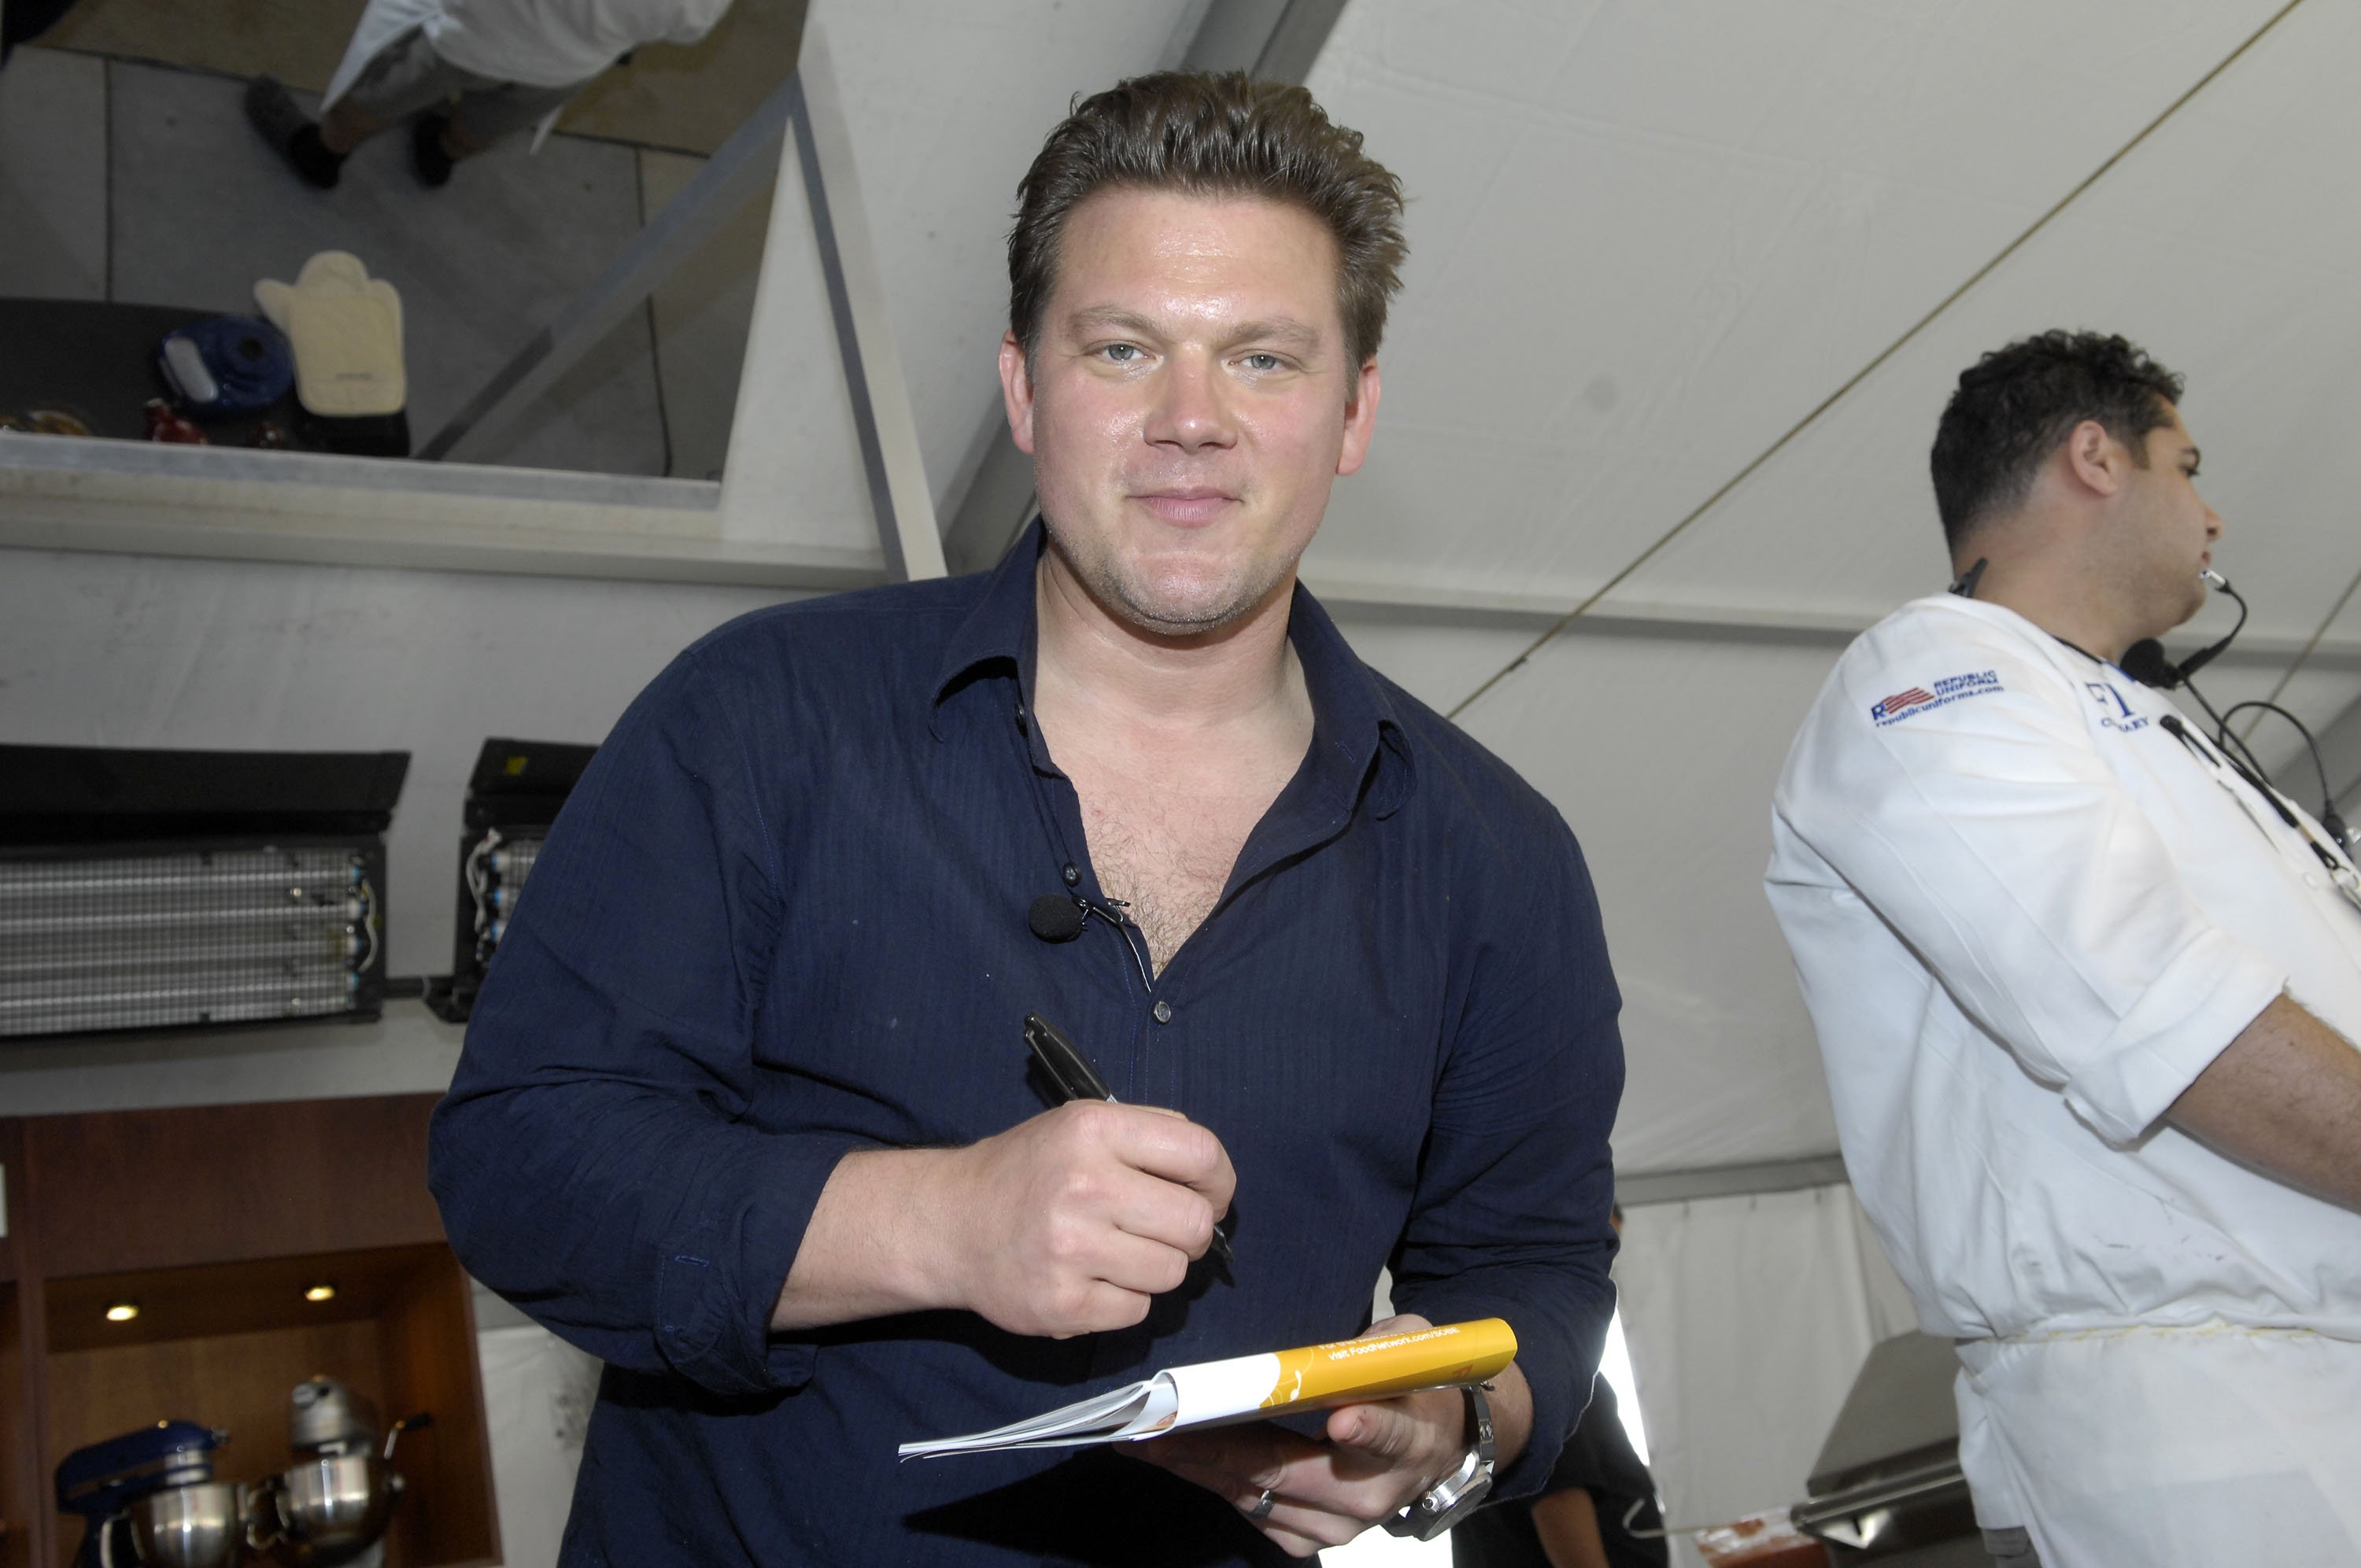 Food Network personality Tyler Florence wears a dark blue button-down shirt in this photograph.